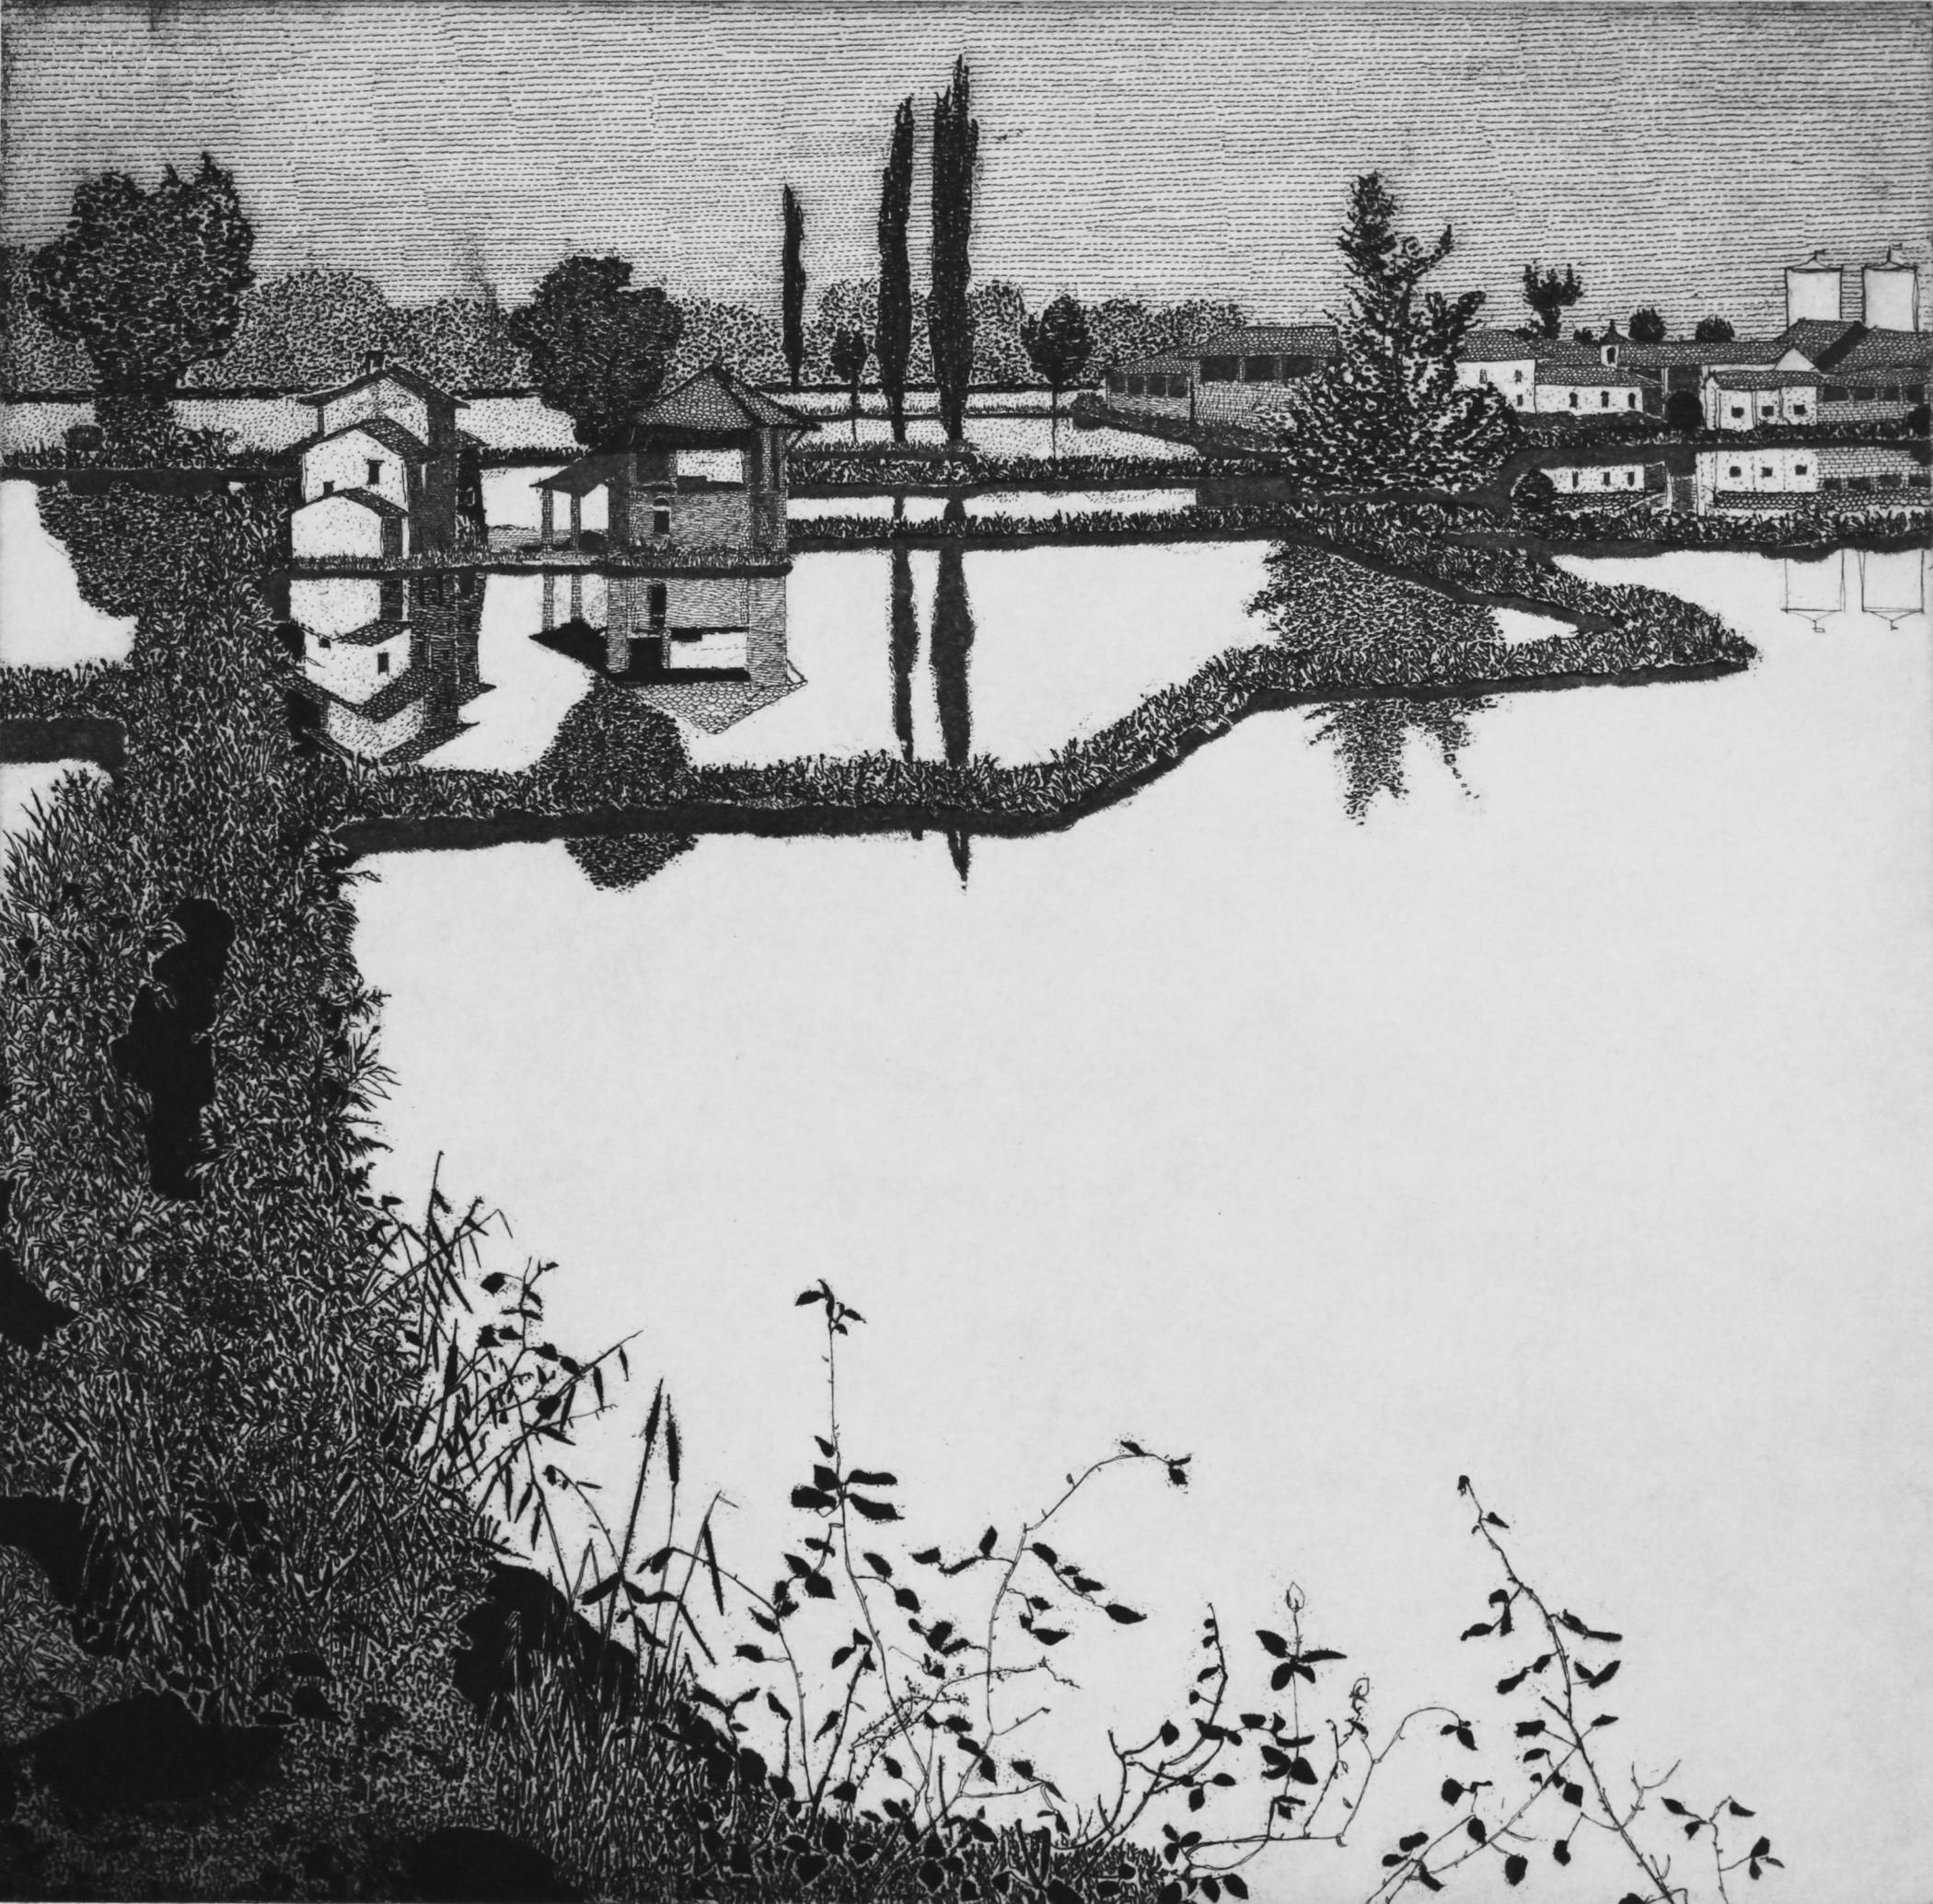 Cascina Rosina, 1983, rif. 469

Etching inches 15.2 x 15.3 (mm 387 x 390). Contemporary Art

Etcher. A prominent figure of the art of engraving in Italy, Federica Galli was born in 1932 in Soresina – a village just outside Cremona. Straight after